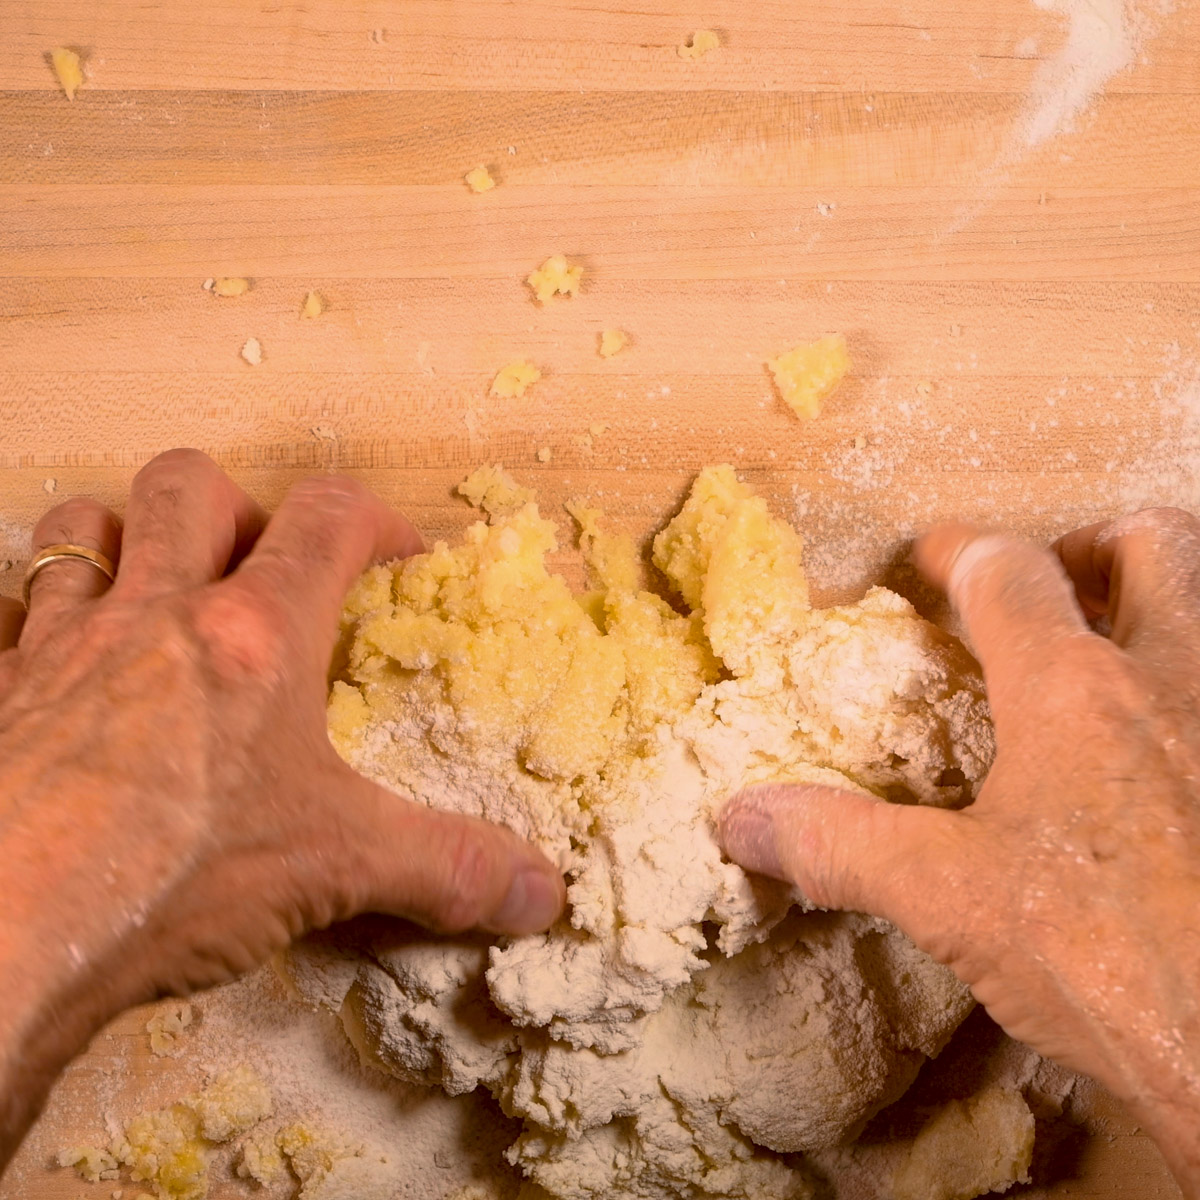 Work the eggs into the potatoes to form a dough.